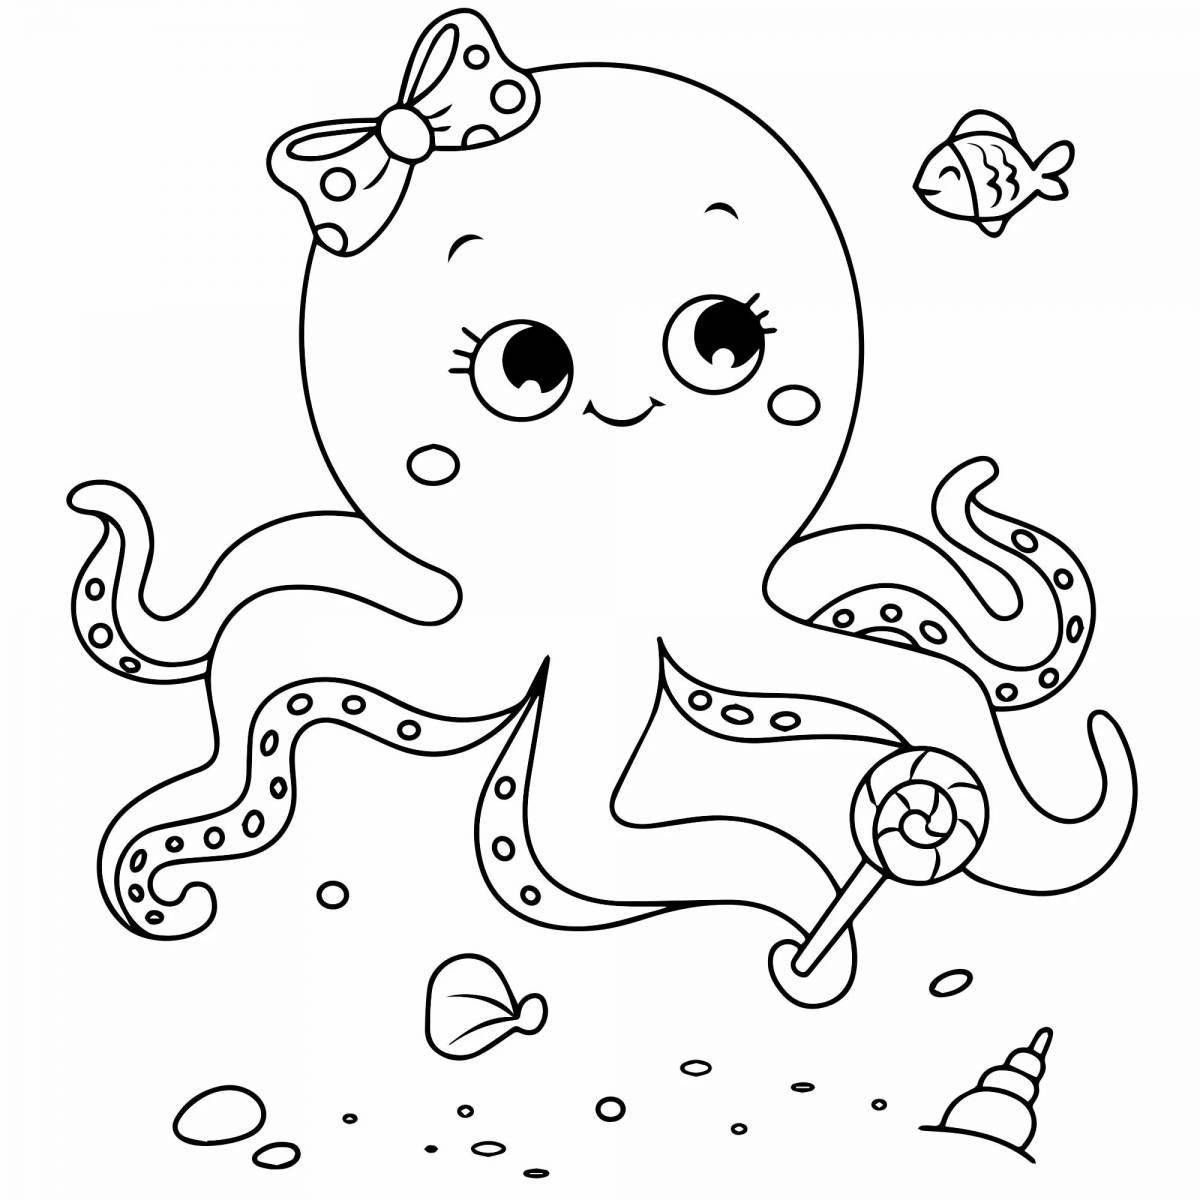 Adorable sea life coloring page for 3-4 year olds